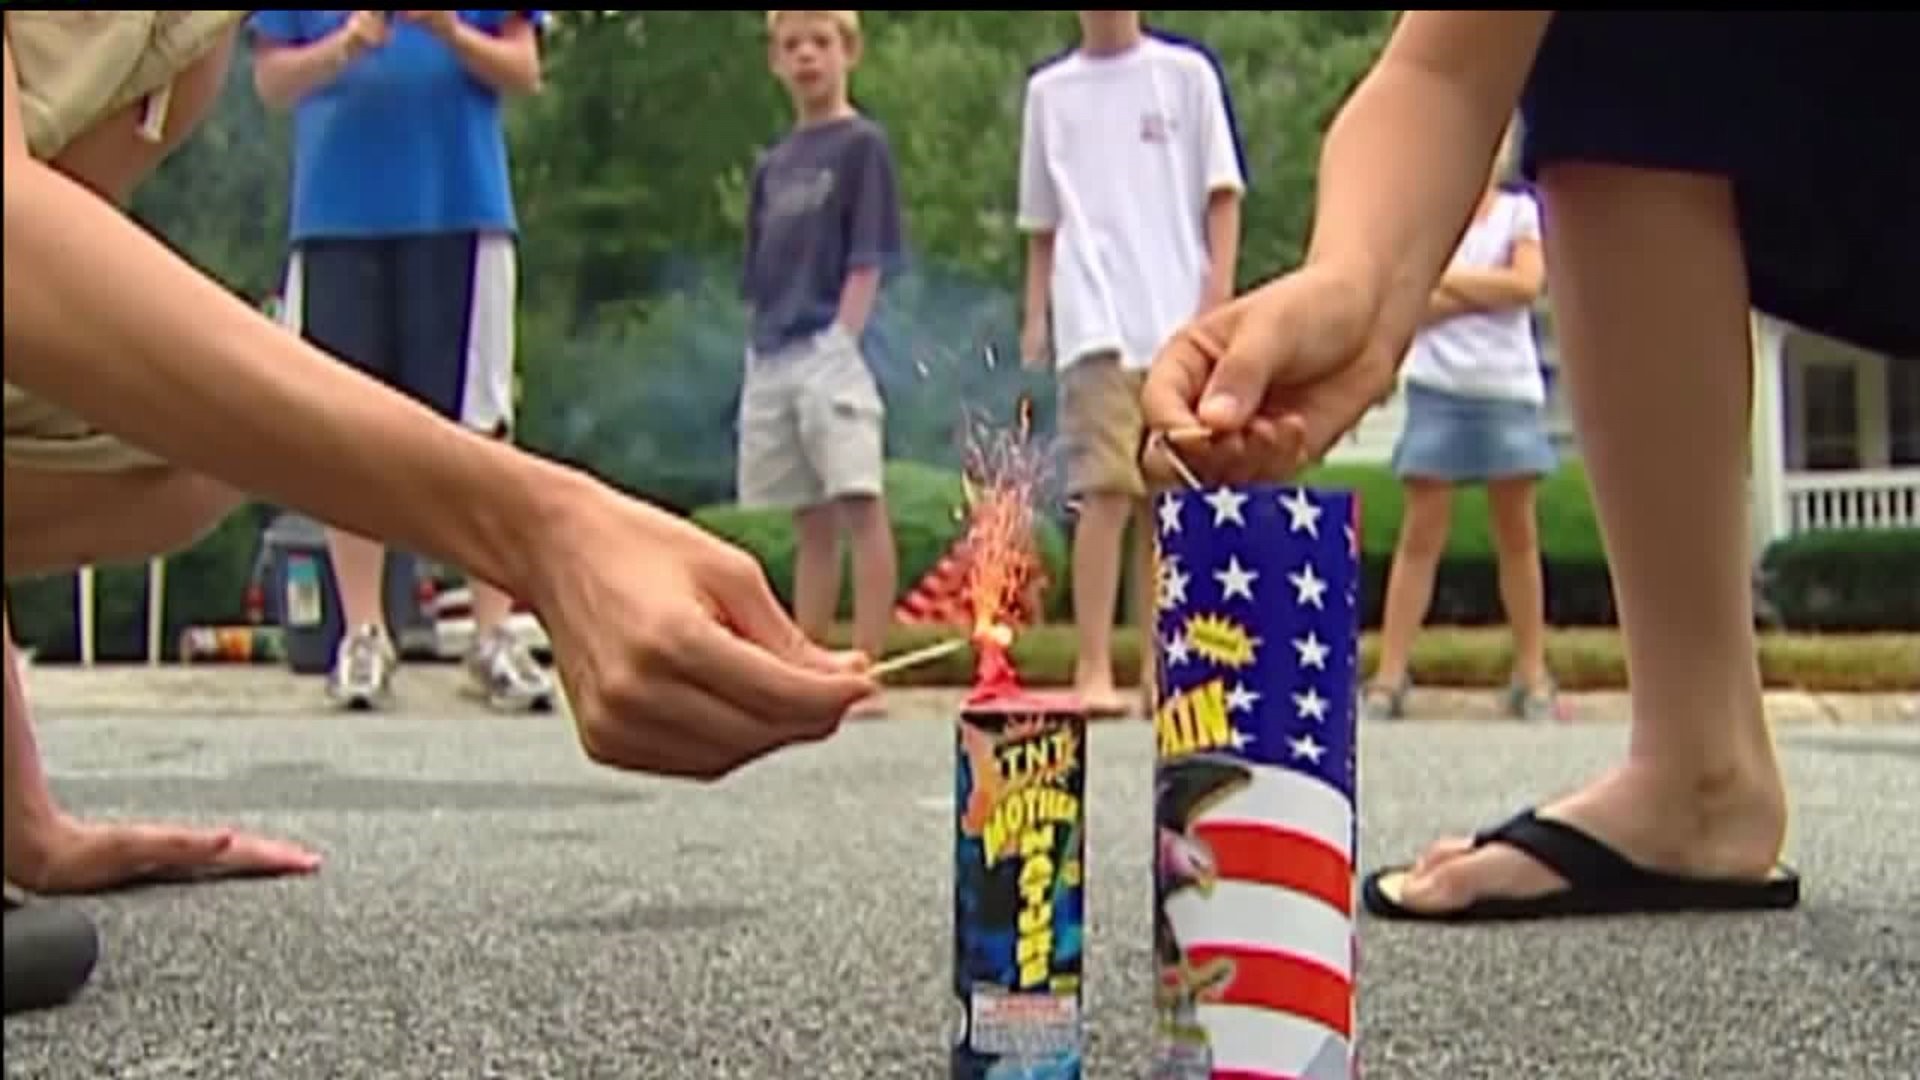 Officials to ban fireworks in Lancaster ahead of July 4th weekend